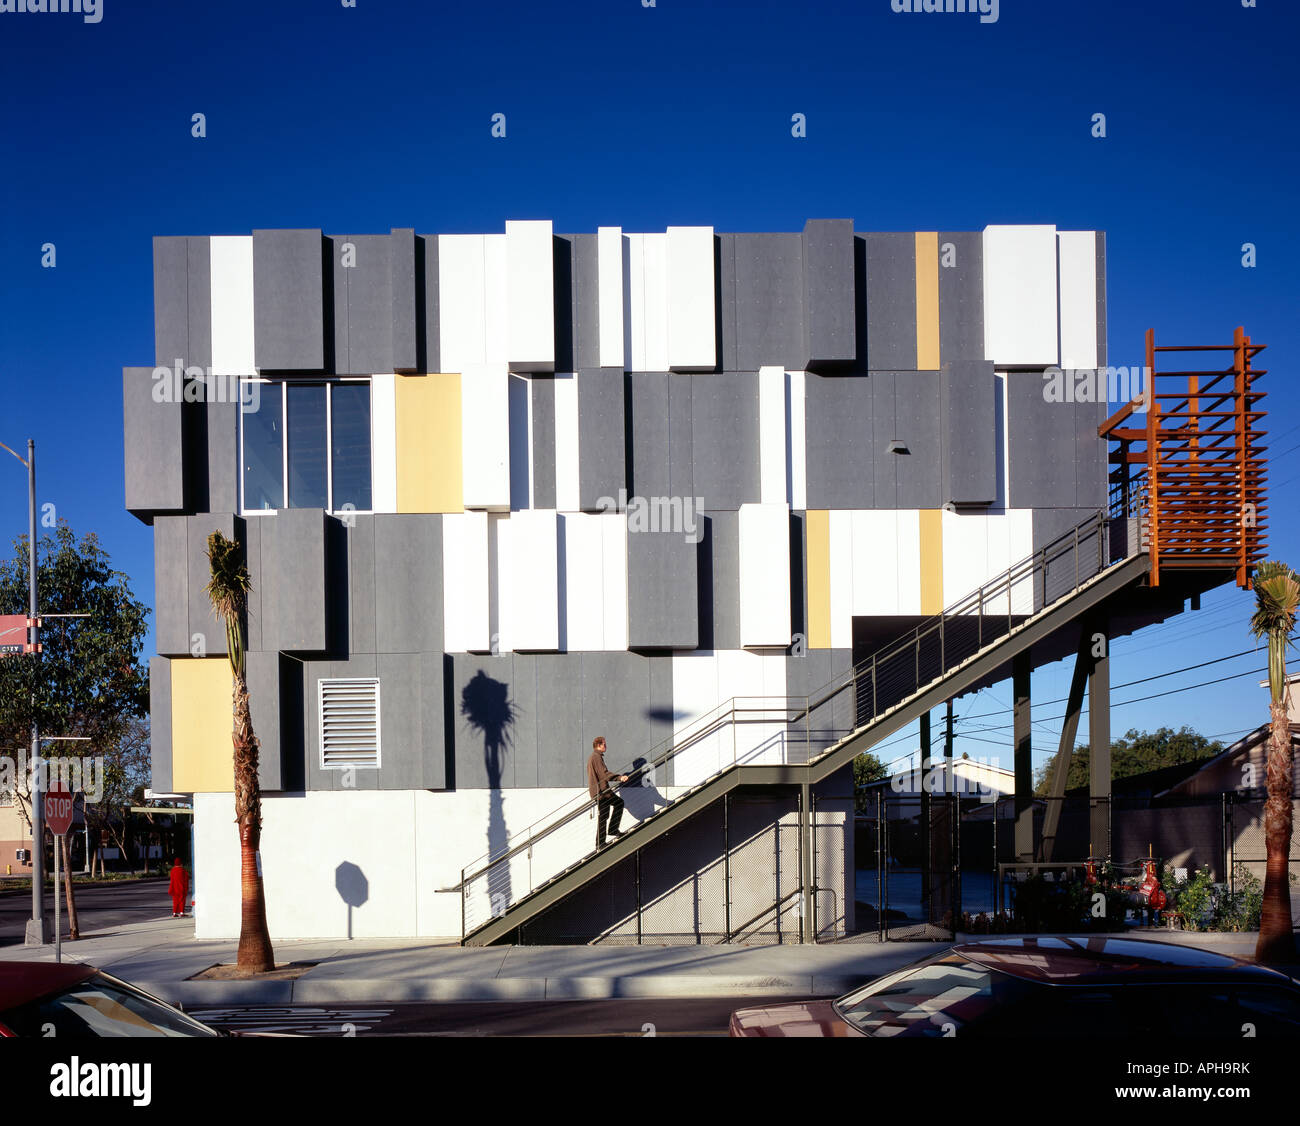 MODAA, Culver City, California Architecture as Art facade with stairs Architect: SPF Architects - Zoltan Pali Stock Photo